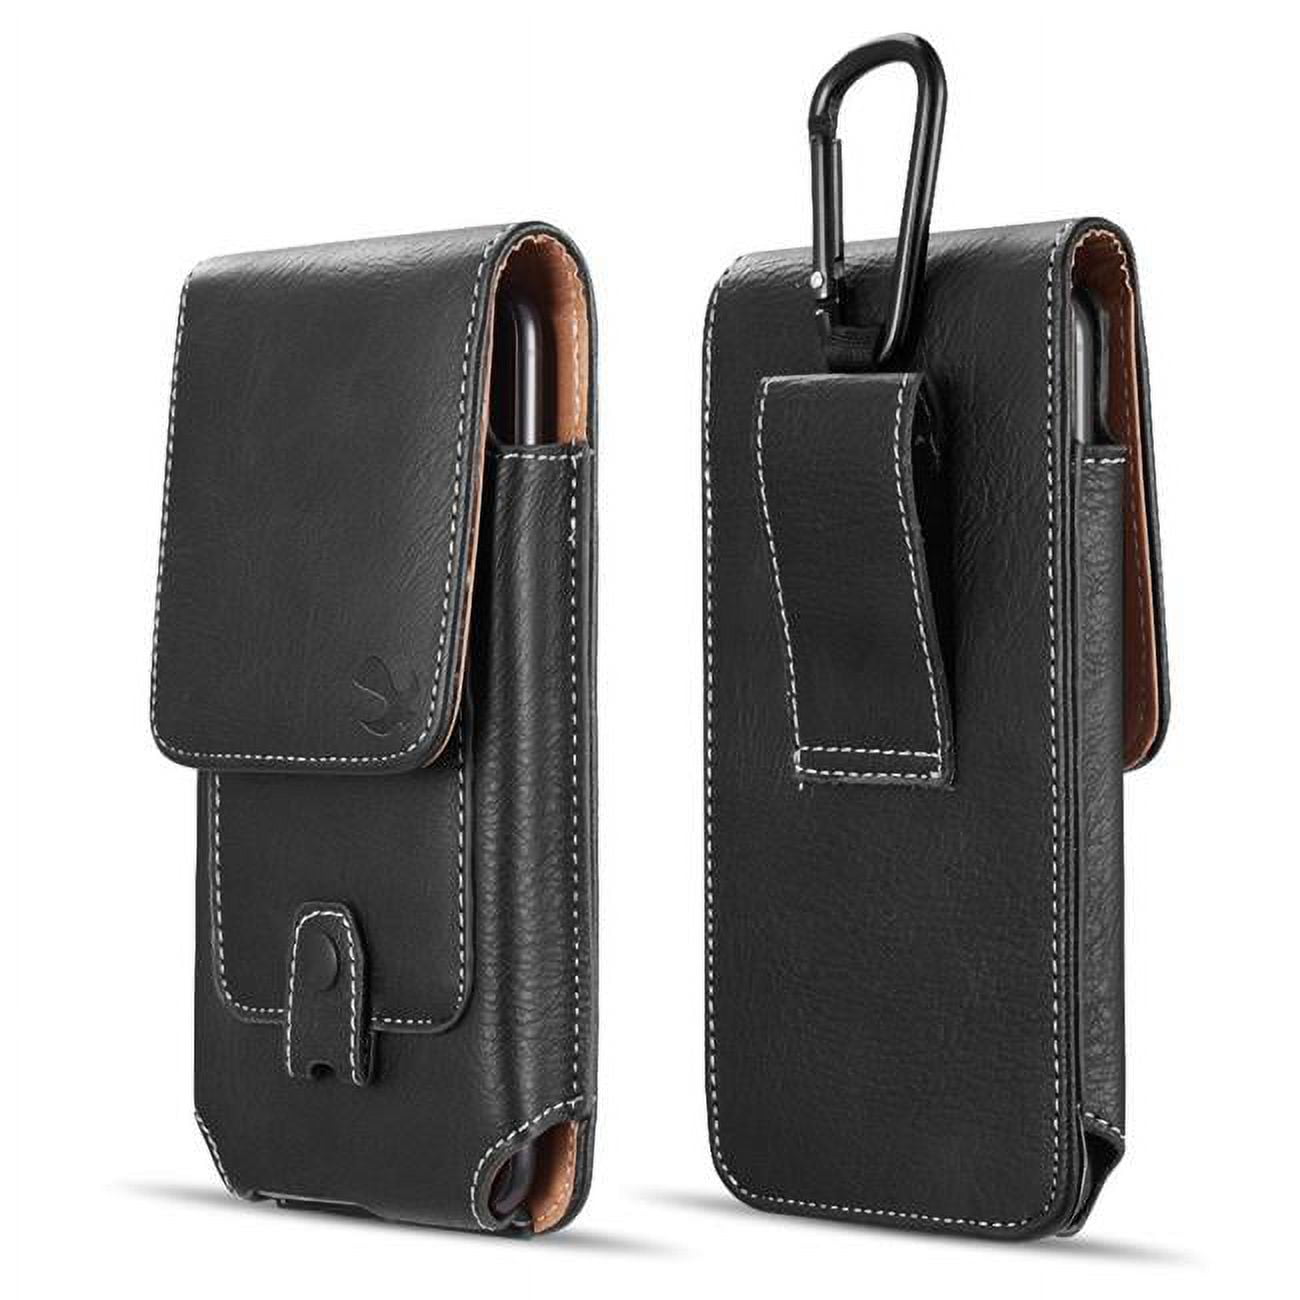 Picture of Dream Wireless LPLGGFLU27VBK 6.3 in. Luxmo No. 27 Mega, LG Flex Vertical Universal Leather Pouch - Black